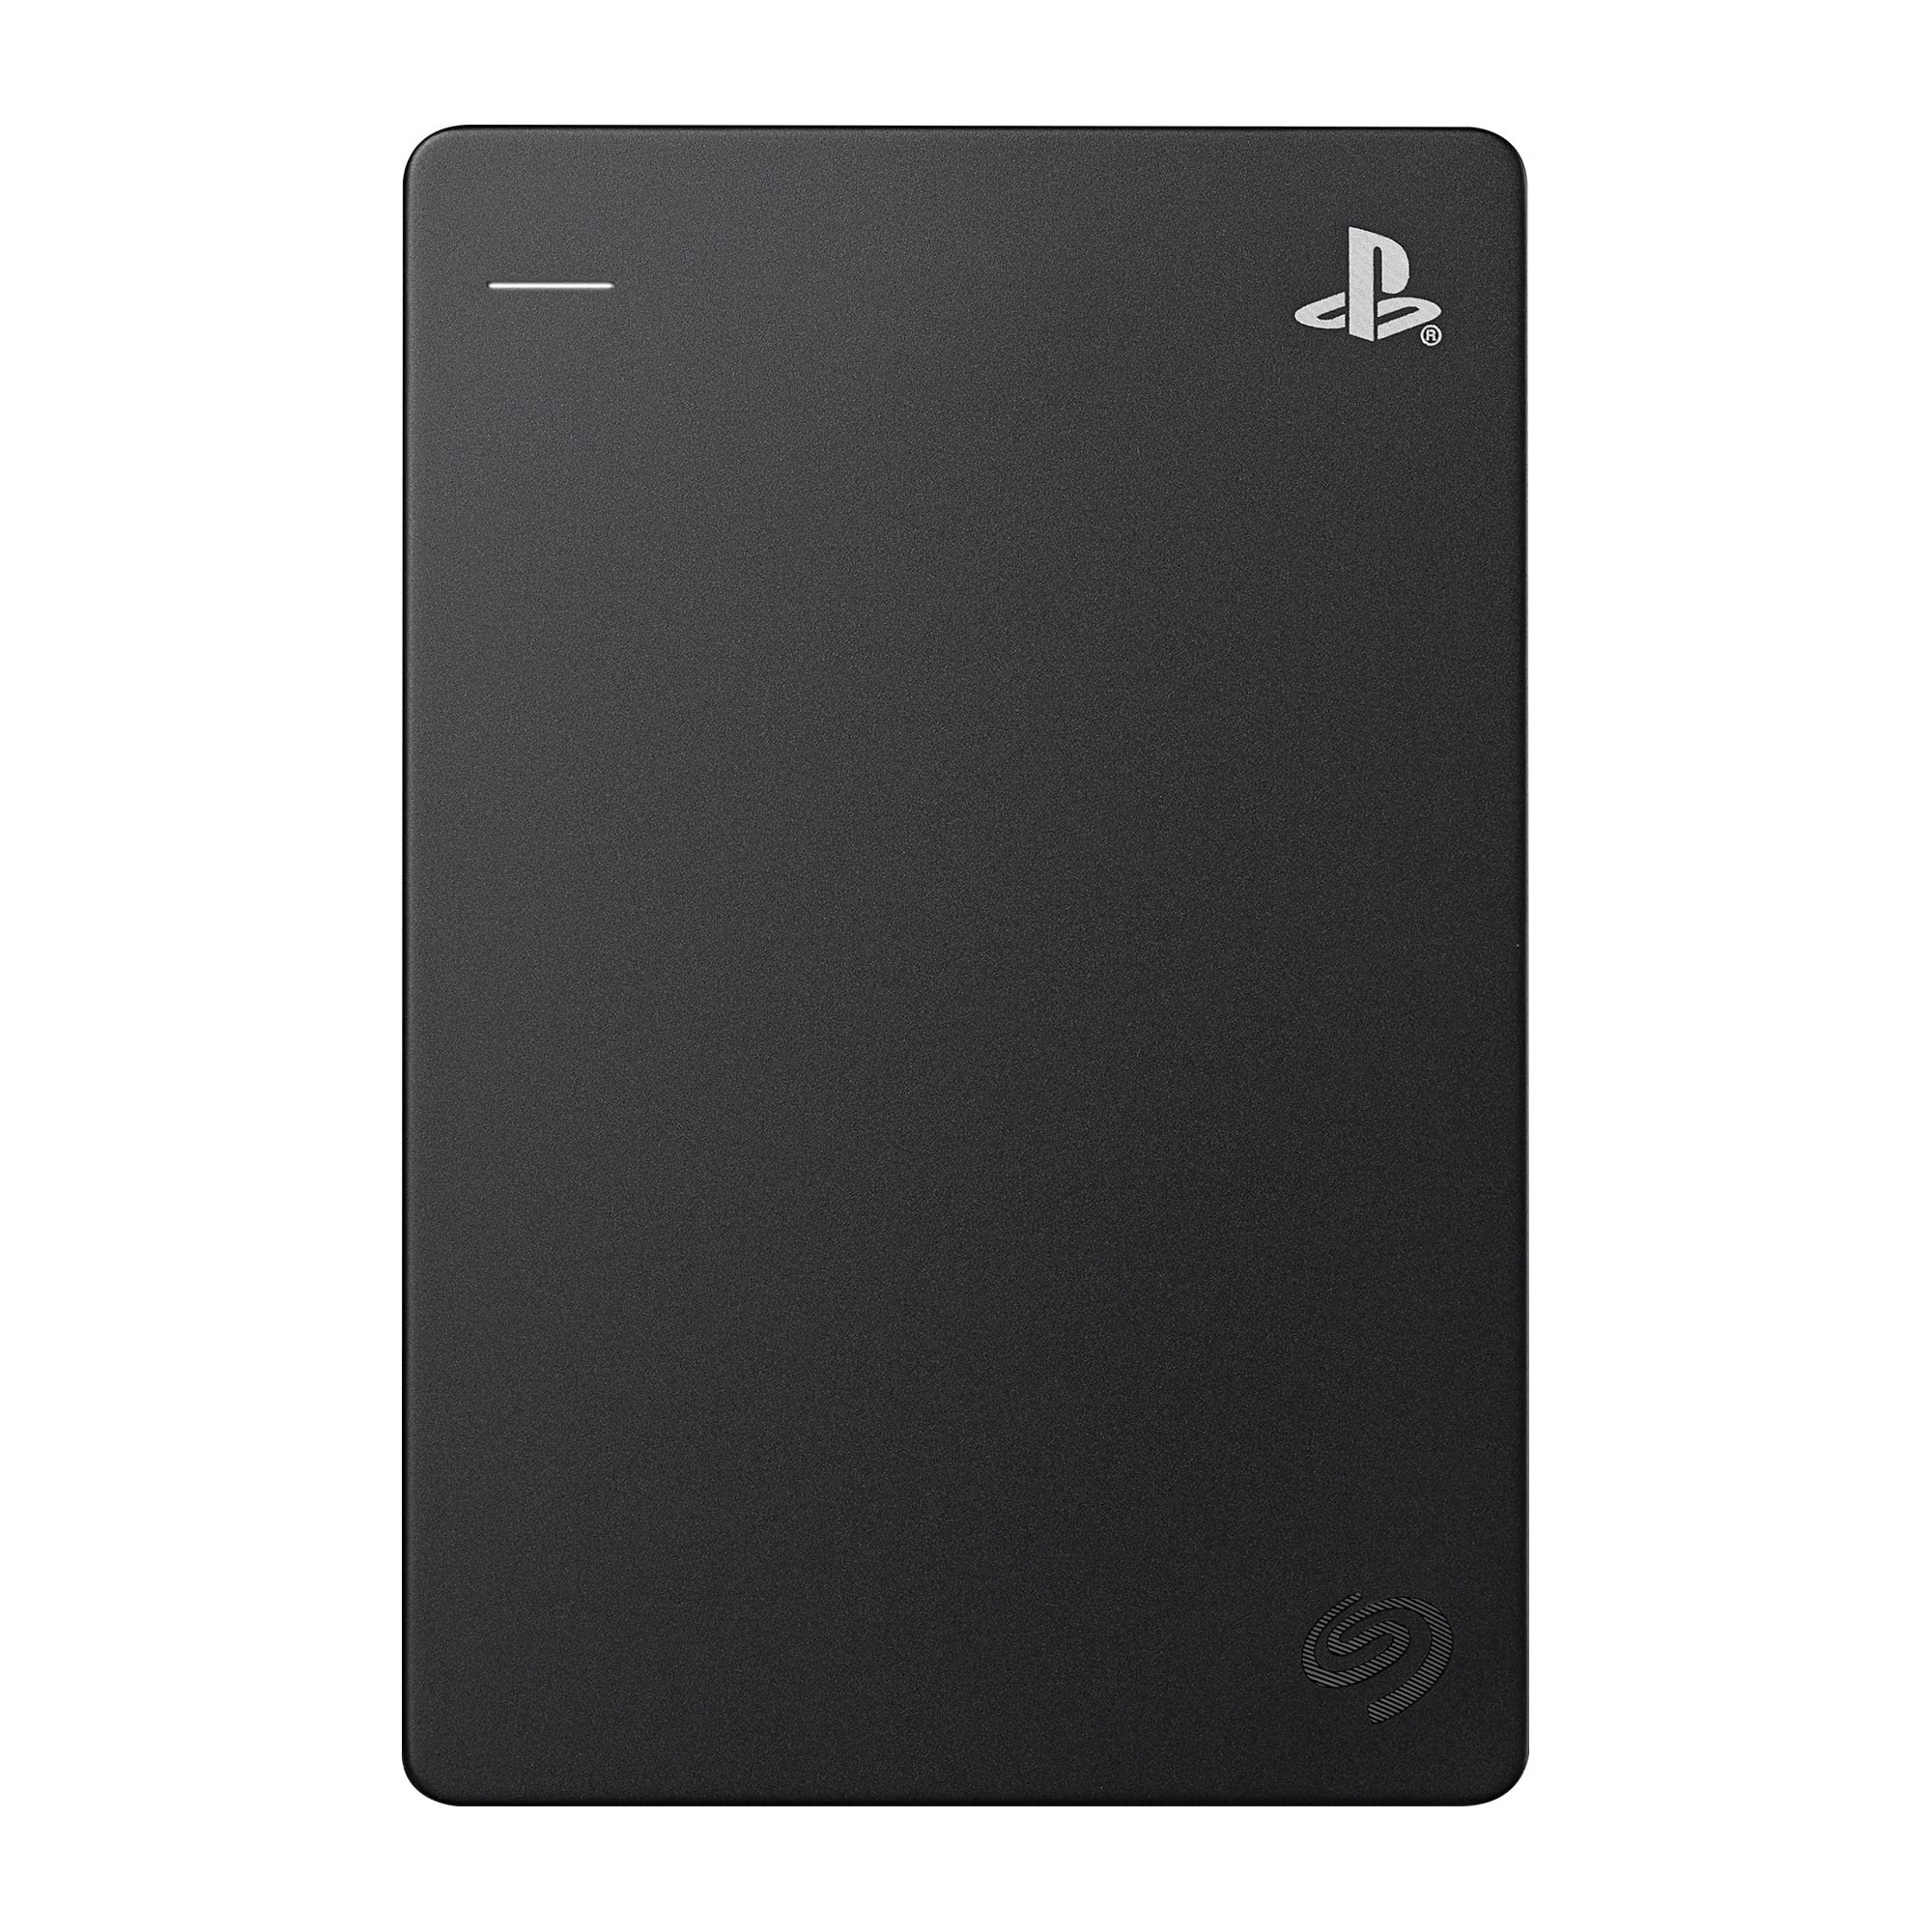 4TB Game Drive For PlayStation